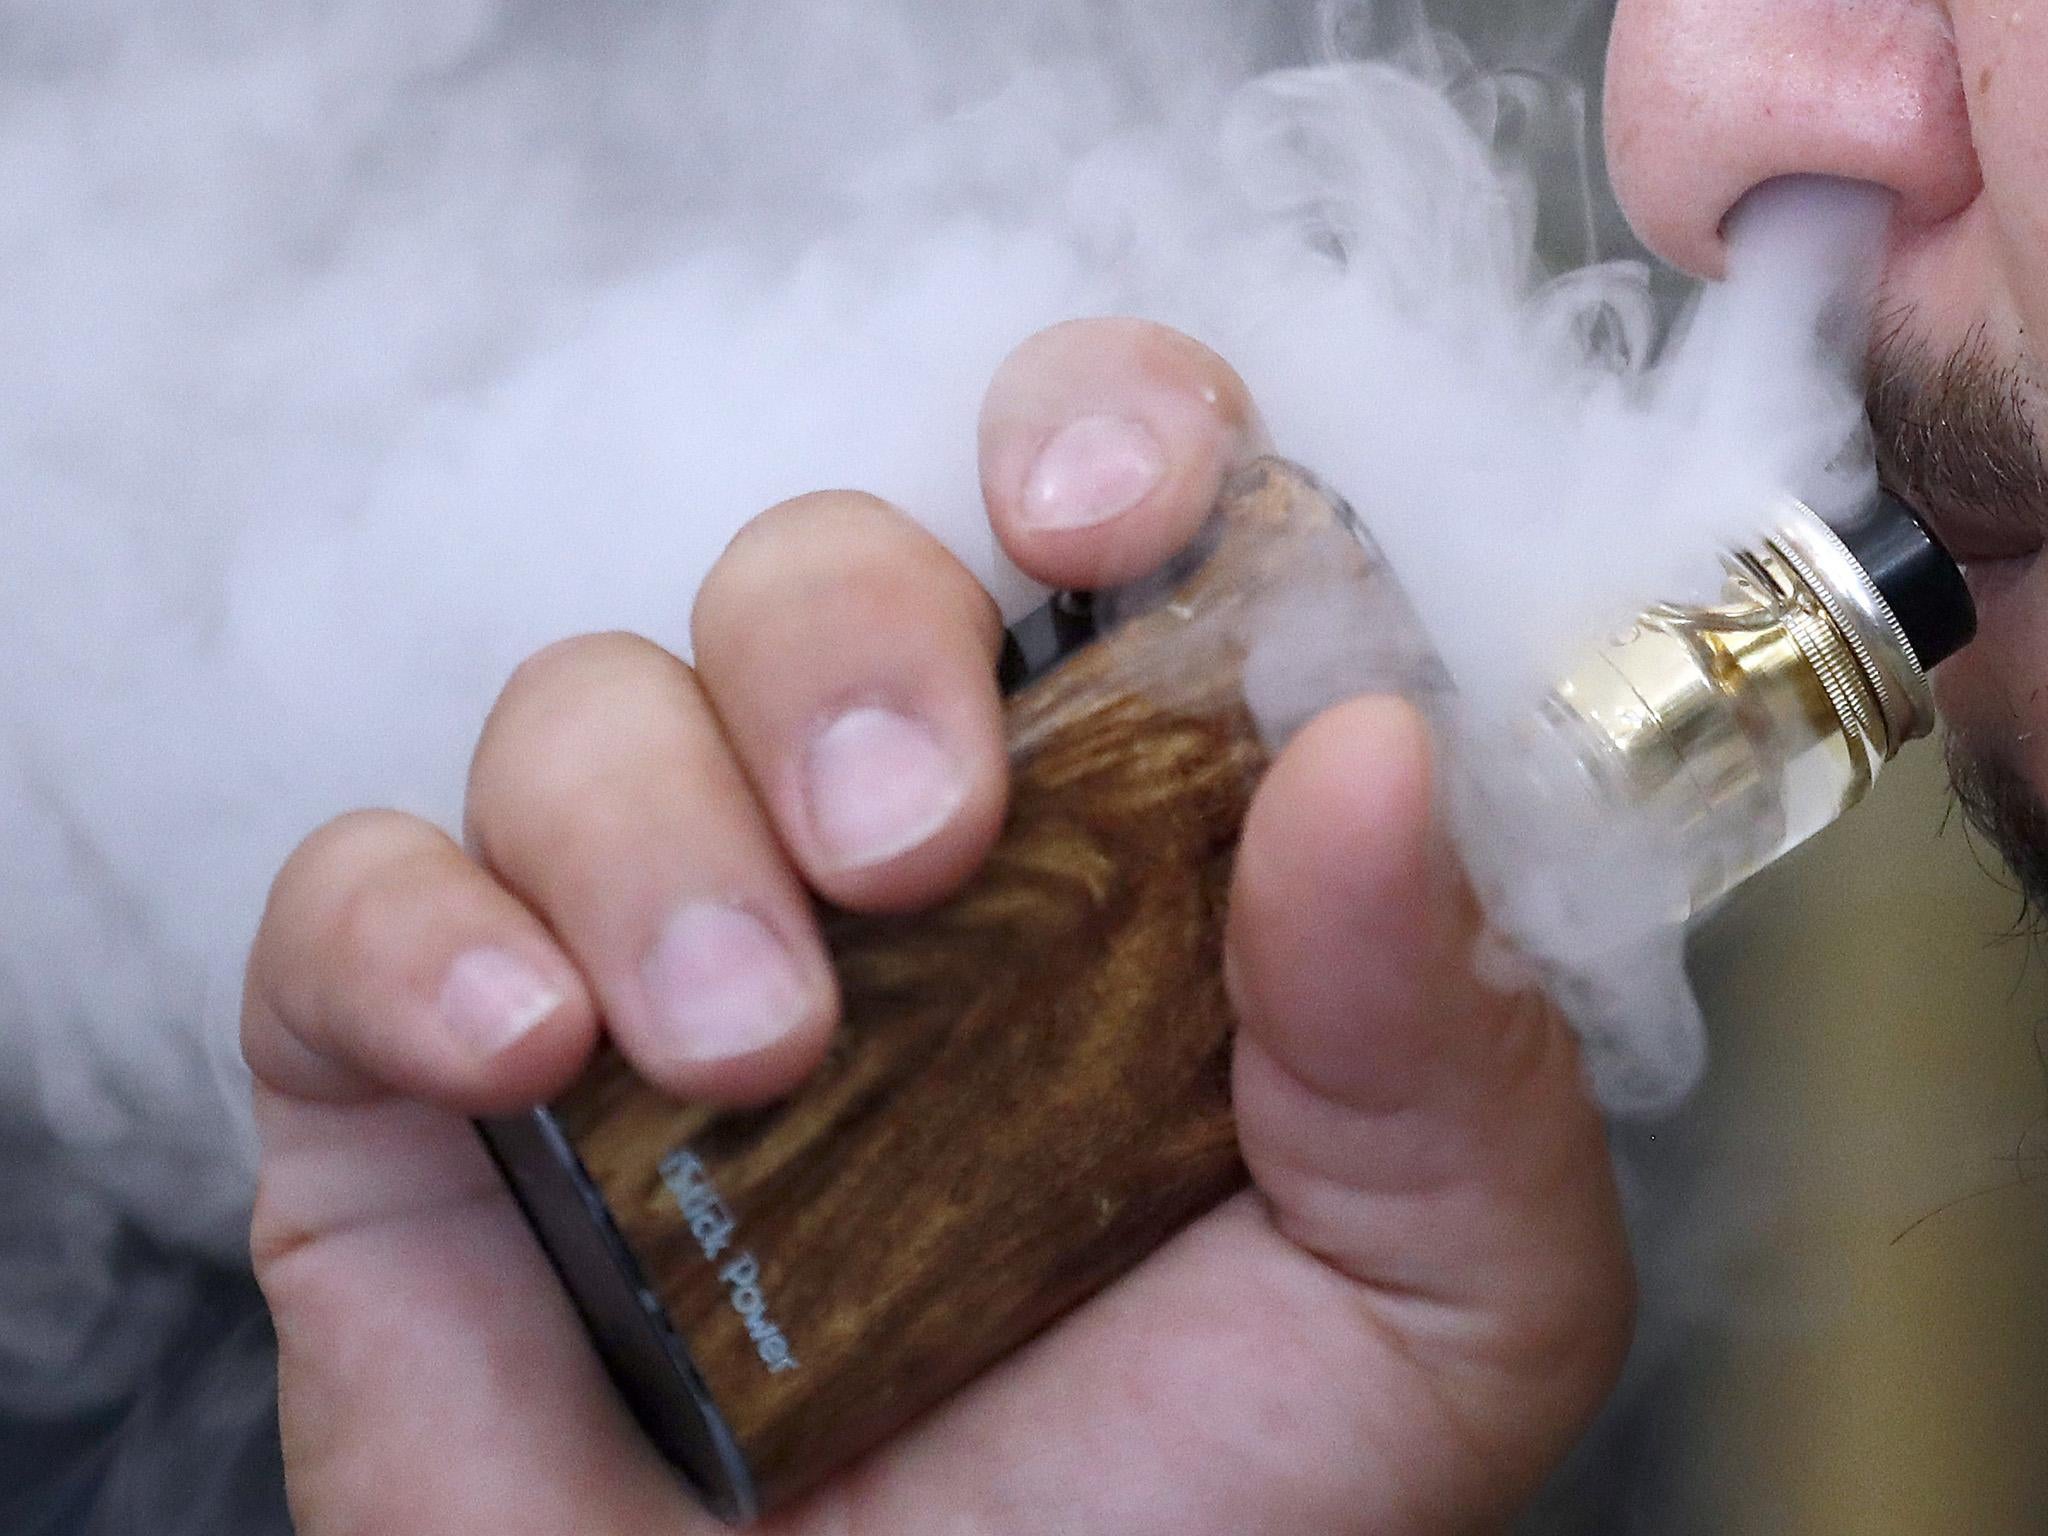 Patients with mysterious vaping related illness being readmitted as little as five days after discharge - The Independent thumbnail